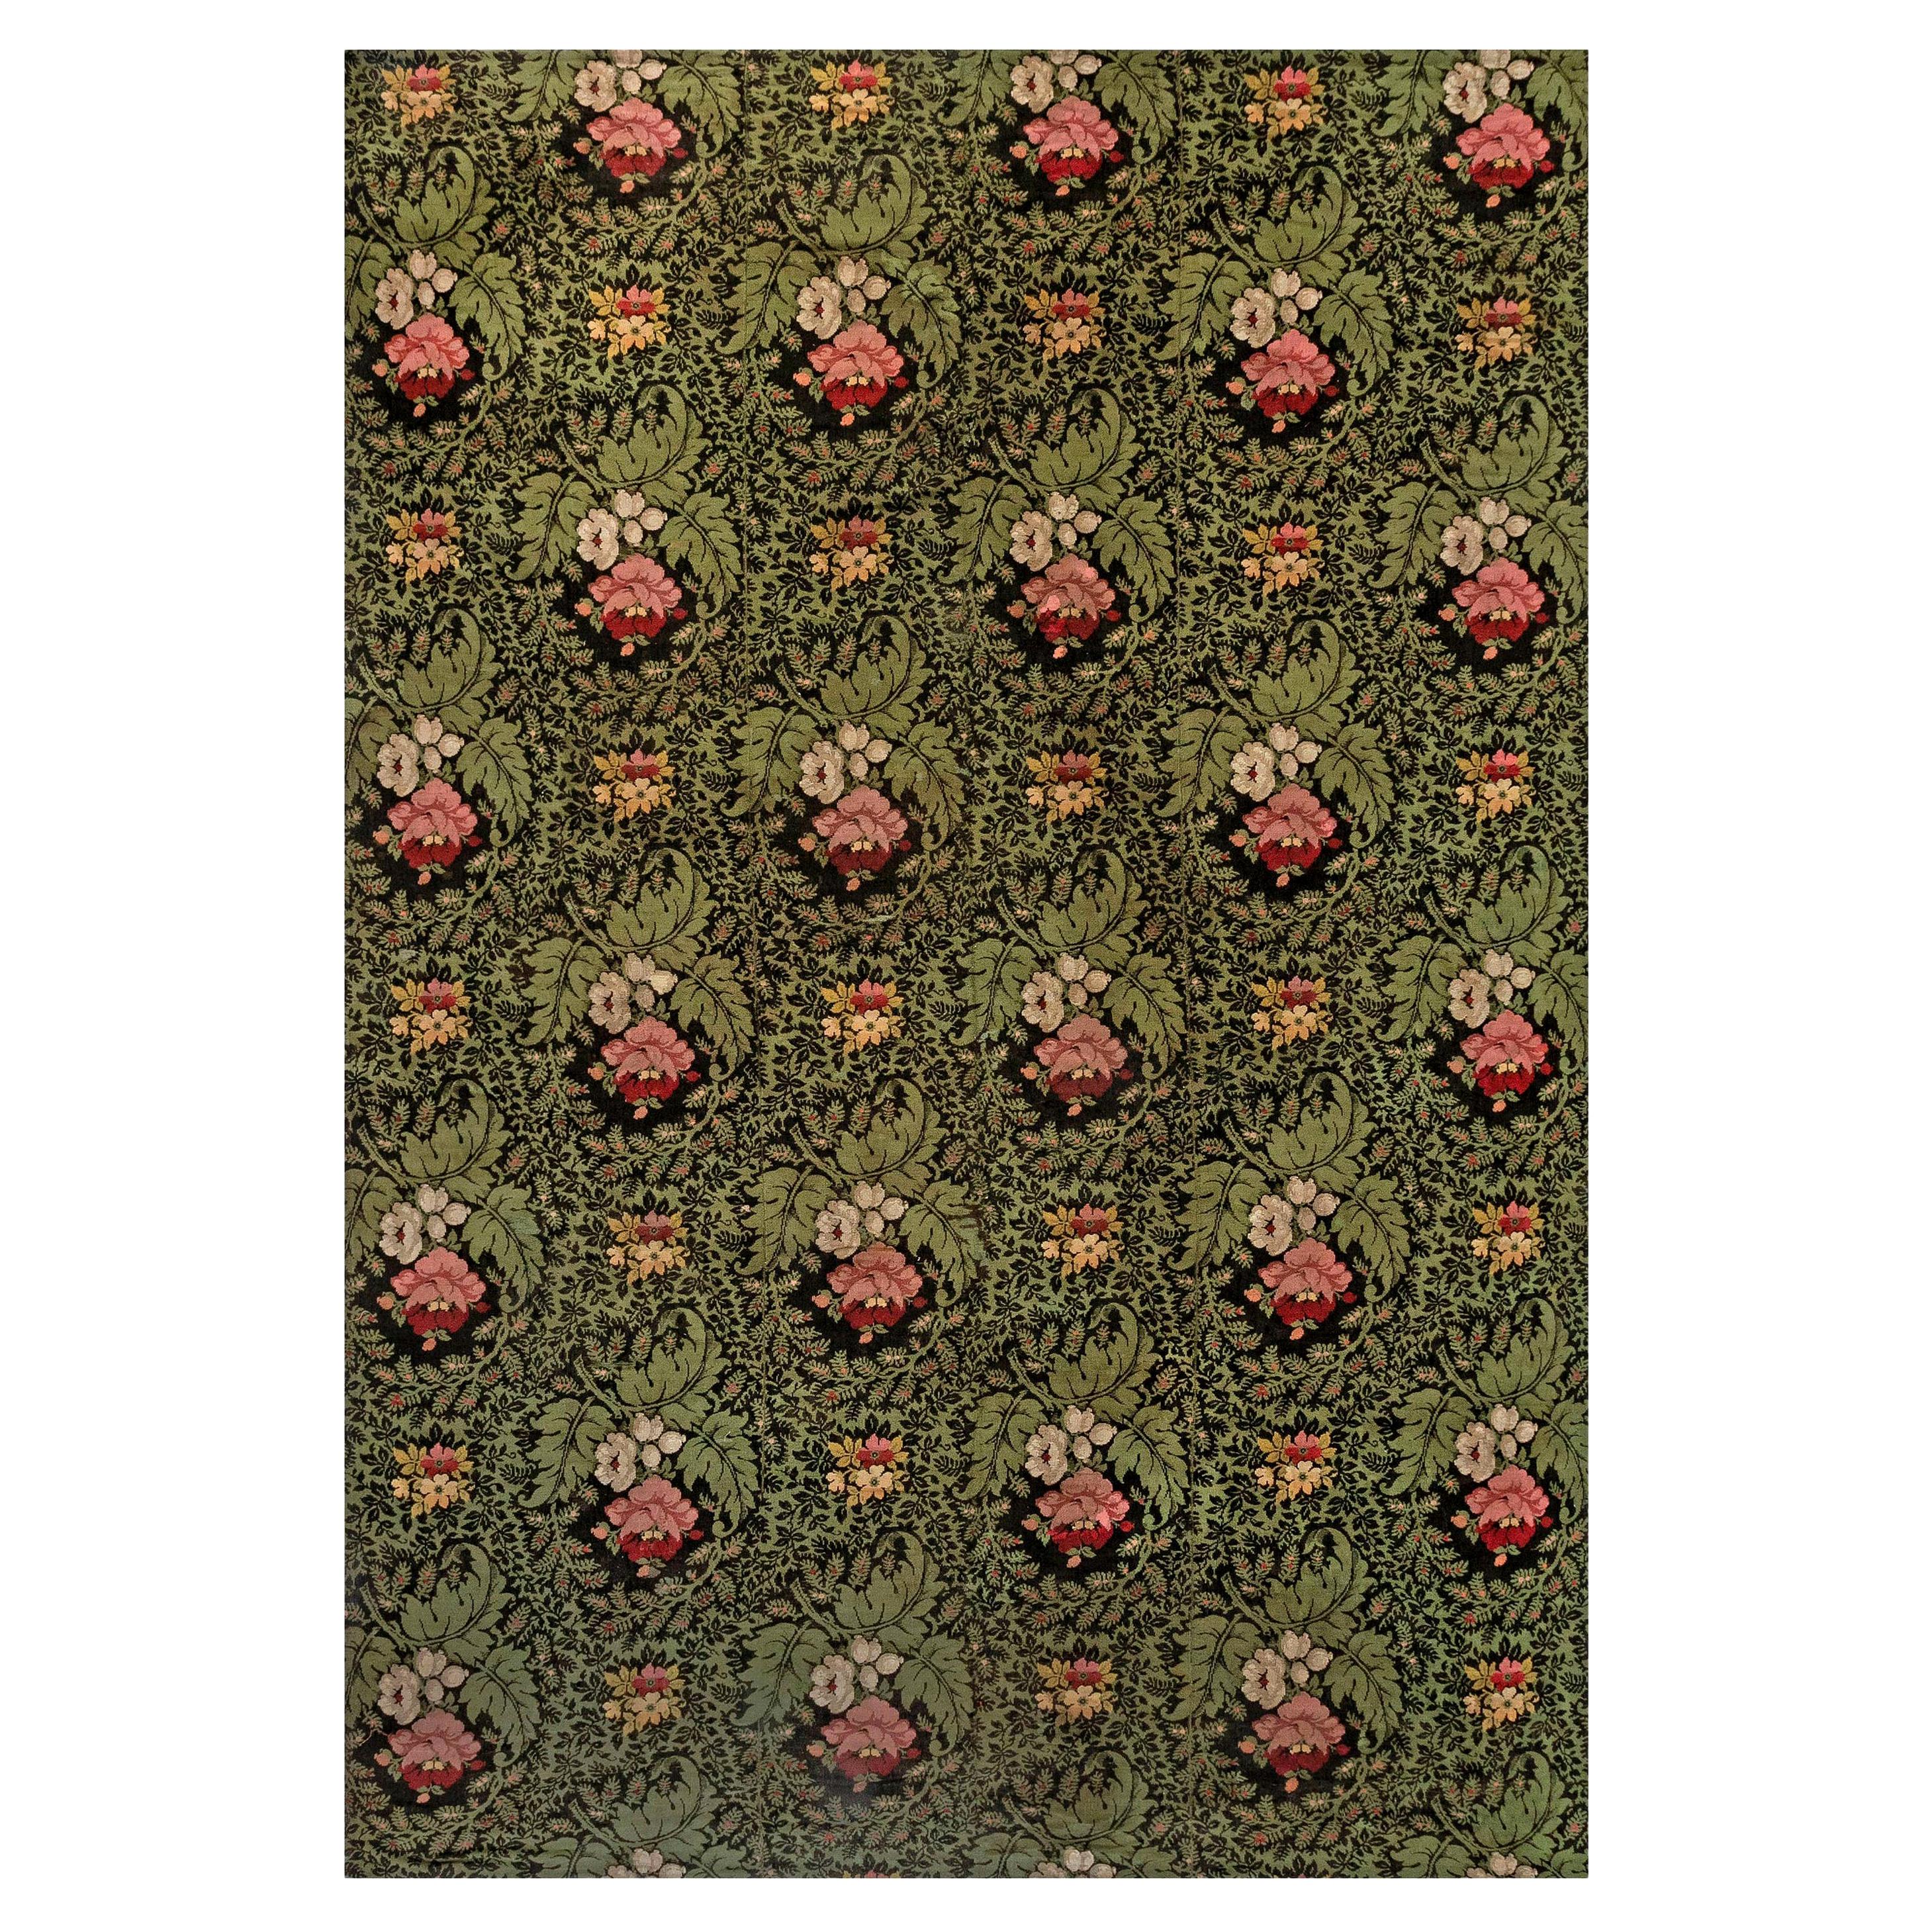 19th Century French Floral Design Green, Black, Pink Needlework Rug For Sale